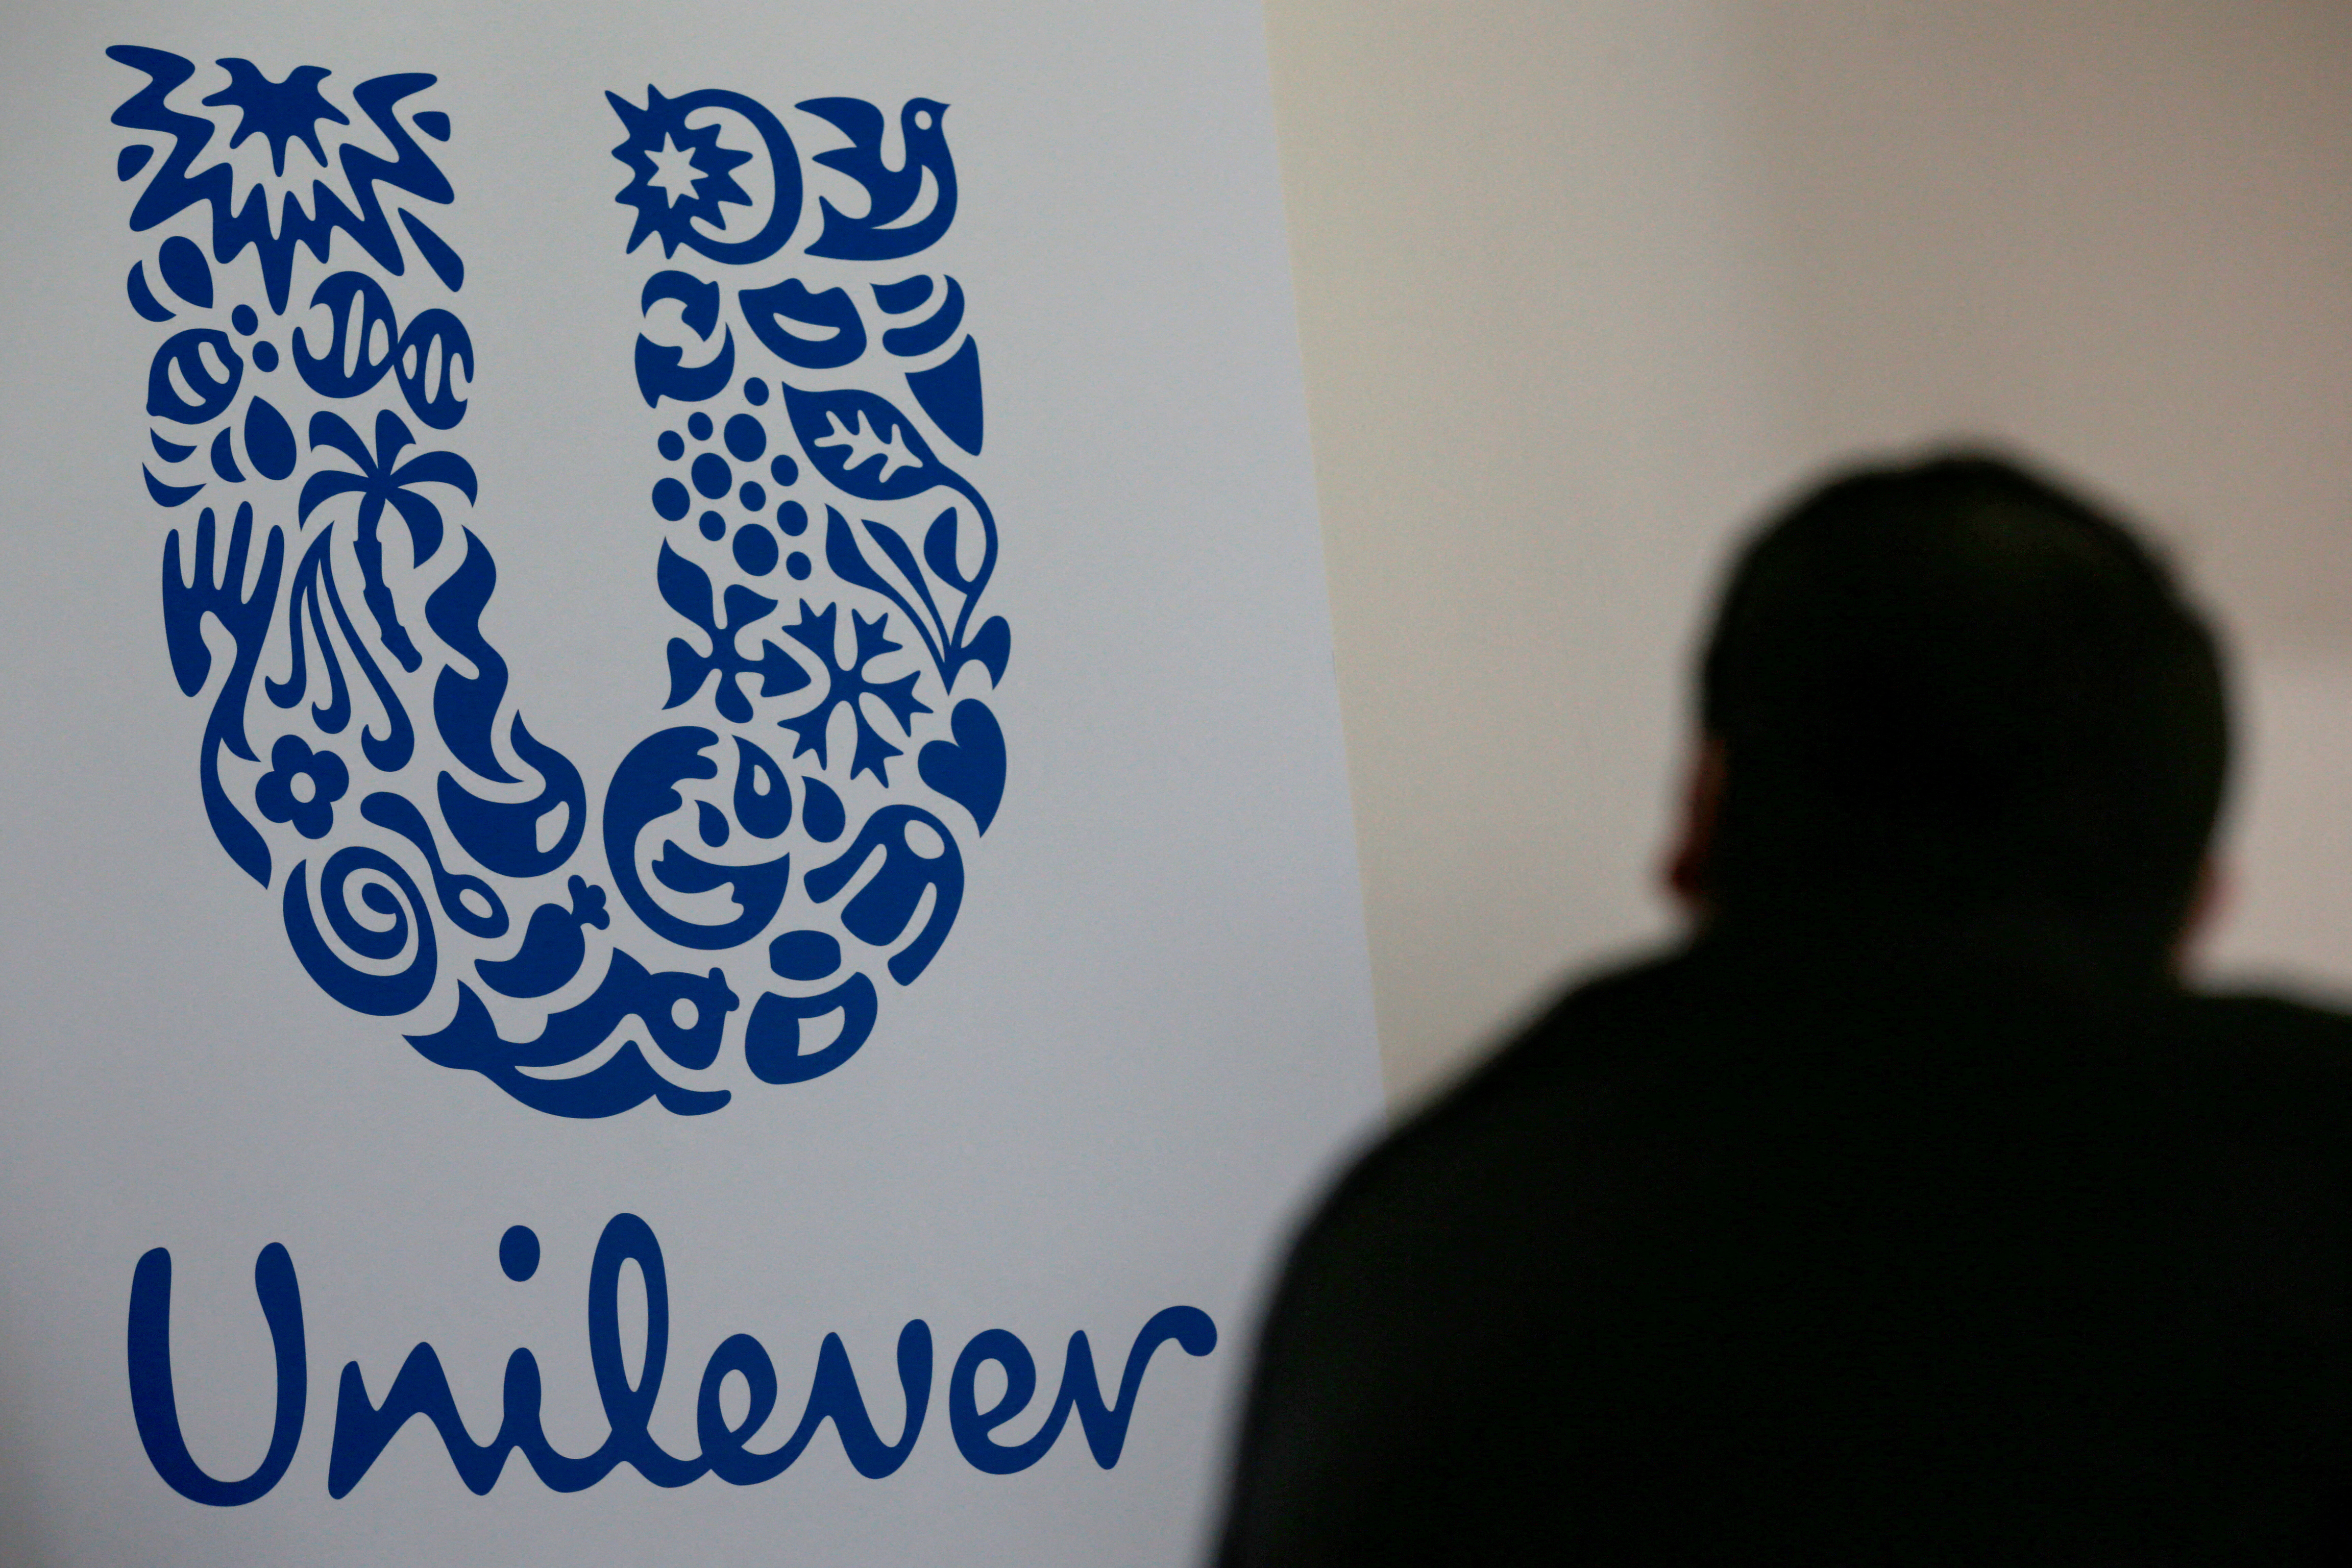 File photo of the logo of the Unilever group